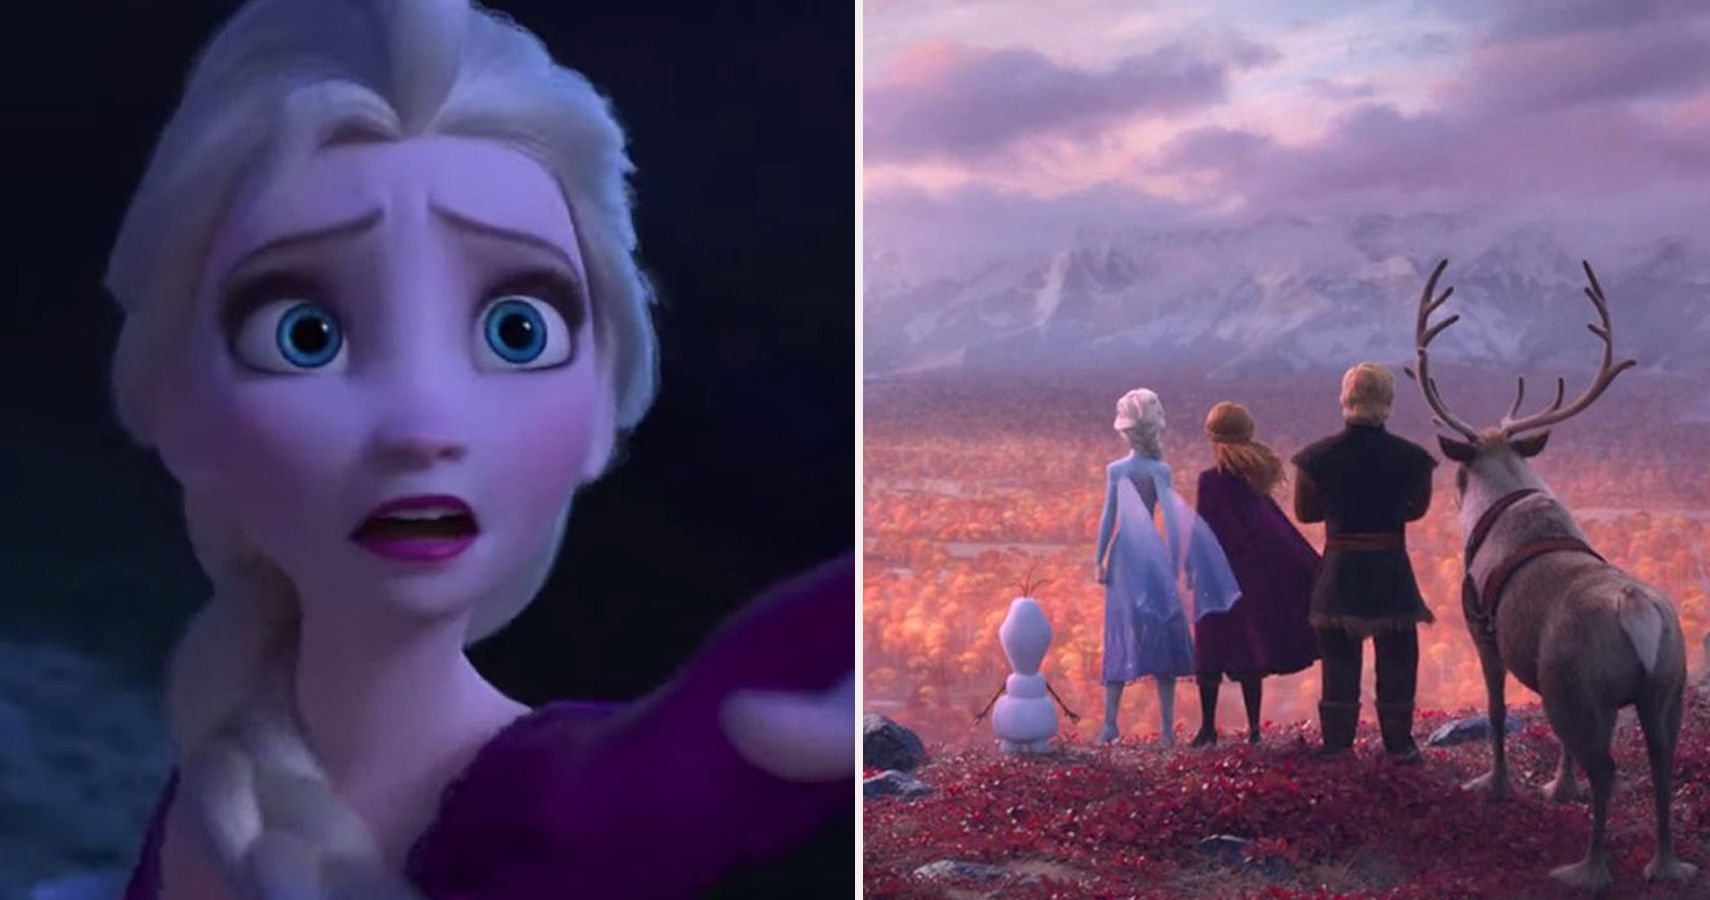 Frozen 2 10 Things You Missed In The Trailer Screenrant 7563